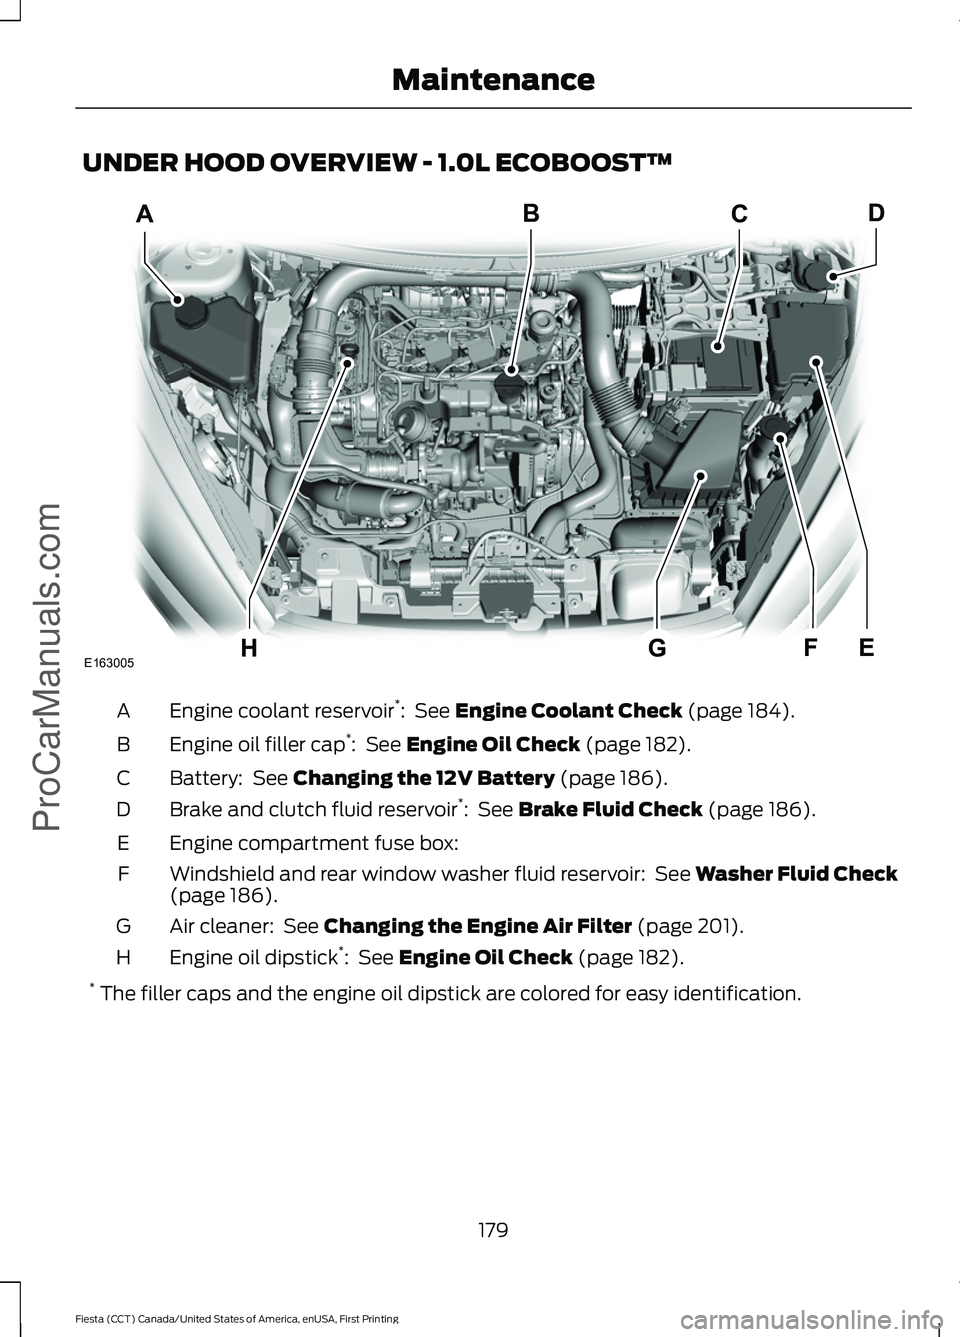 FORD FIESTA 2016  Owners Manual UNDER HOOD OVERVIEW - 1.0L ECOBOOST™
Engine coolant reservoir
*
:  See Engine Coolant Check (page 184).
A
Engine oil filler cap *
: 
 See Engine Oil Check (page 182).
B
Battery: 
 See Changing the 1